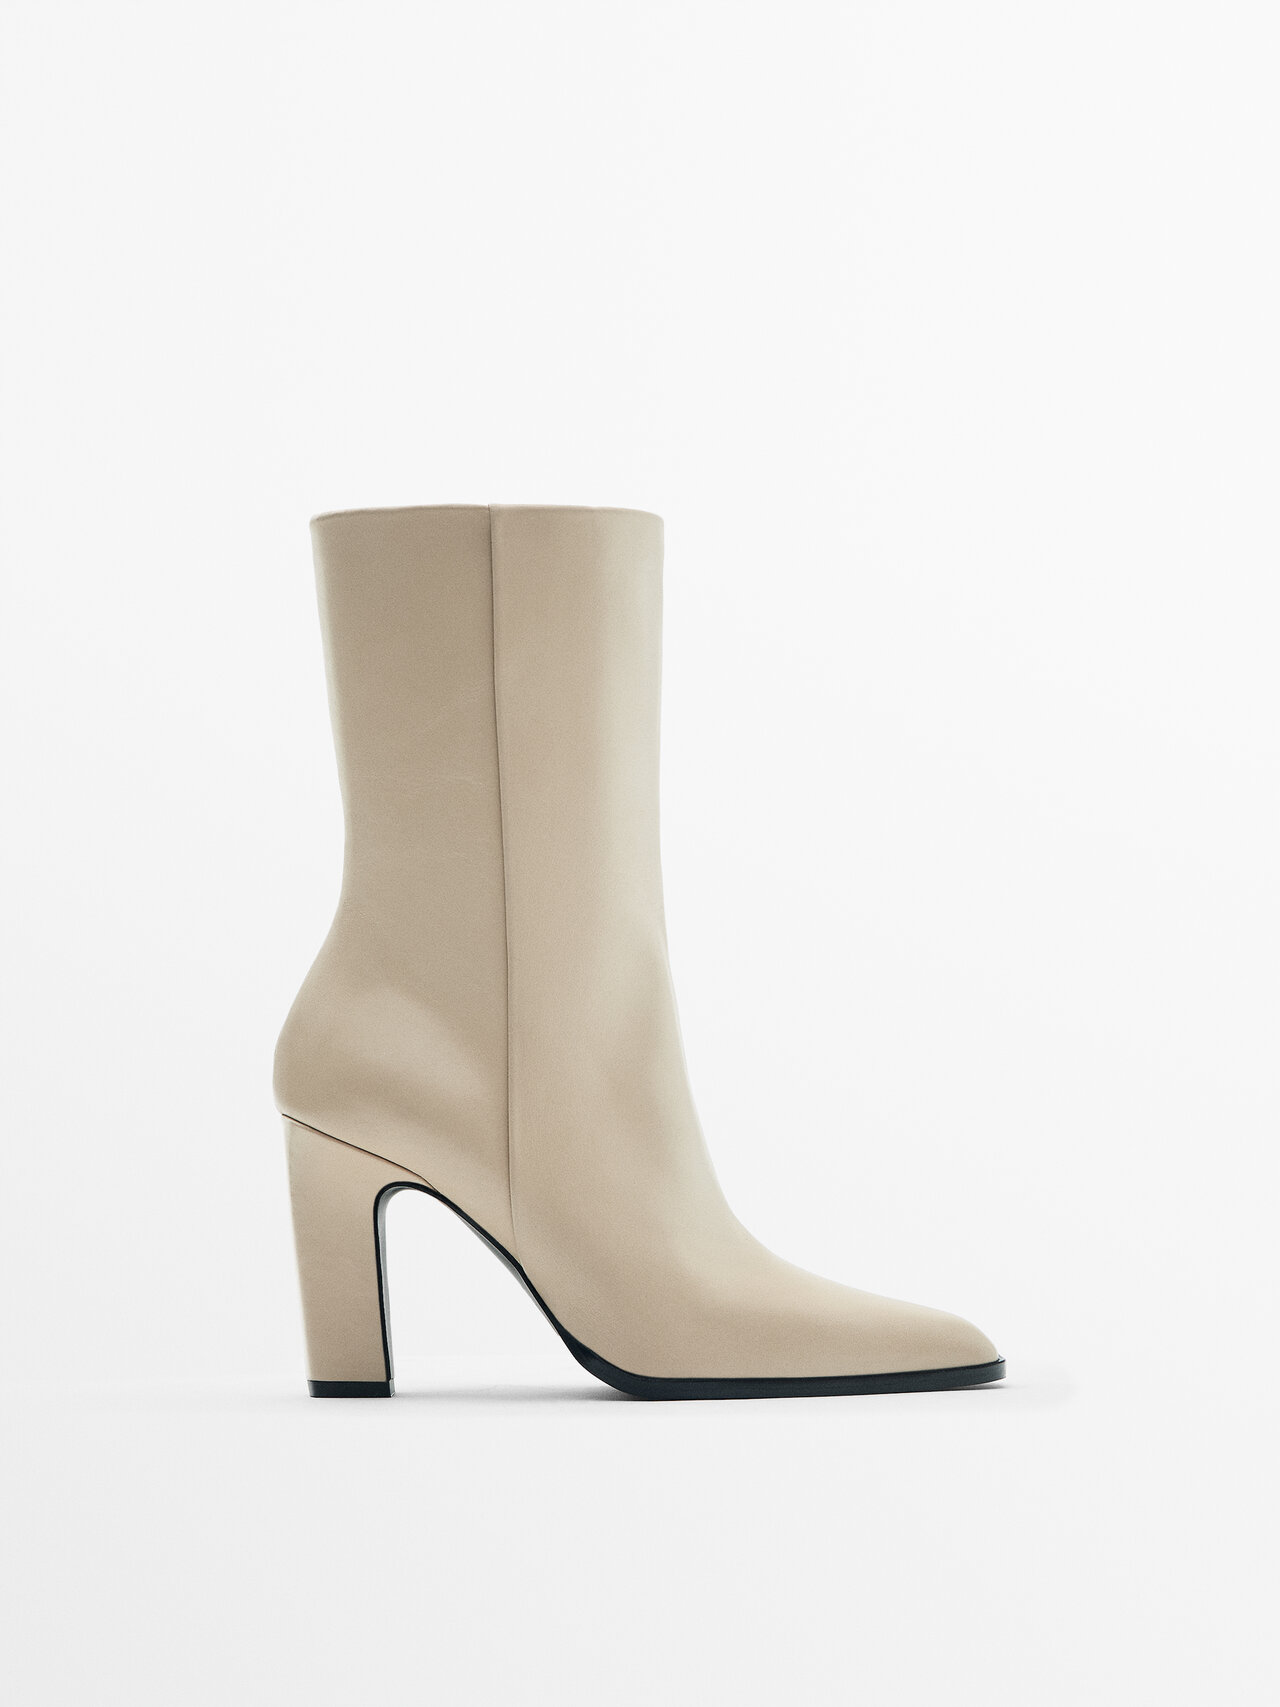 Massimo Dutti Leather High Heel Ankle Boots In Cream